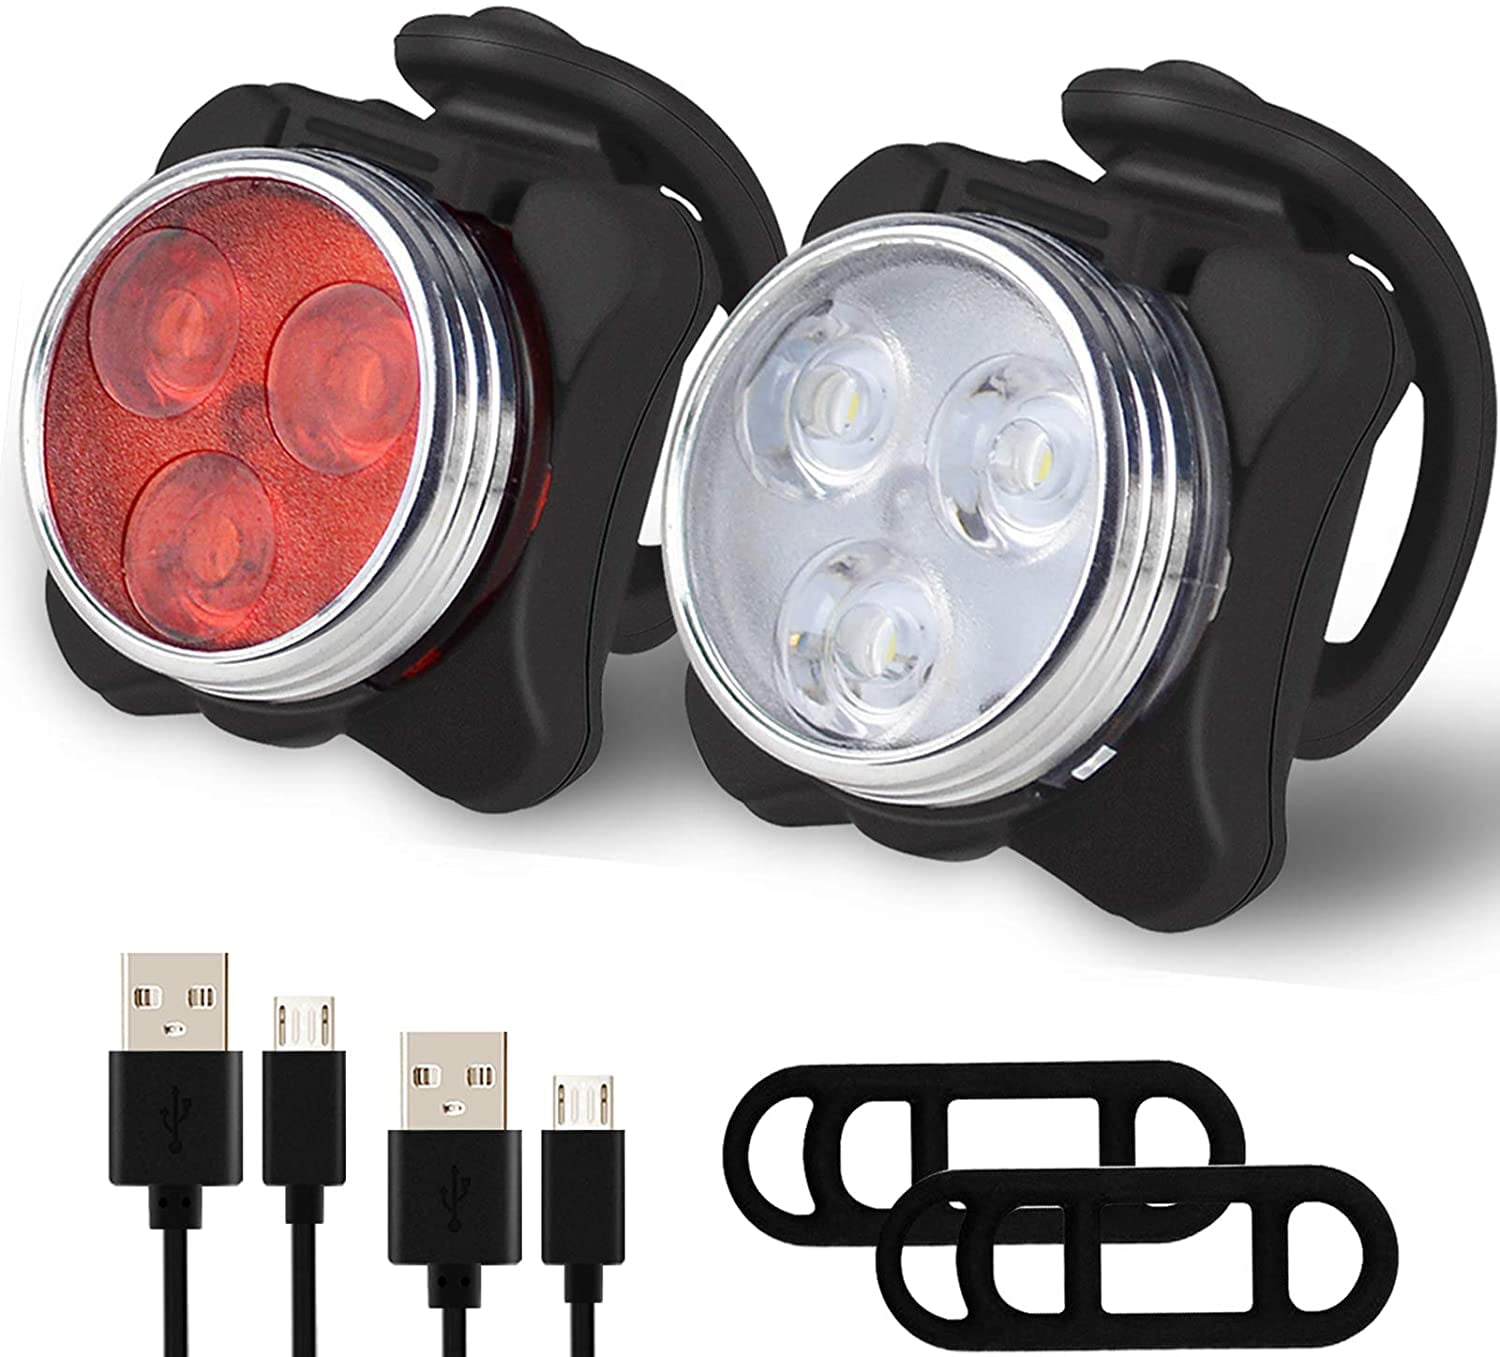 Rechargeable LED Bike Light Set,Headlight and Taillight Combinations,Waterproof 